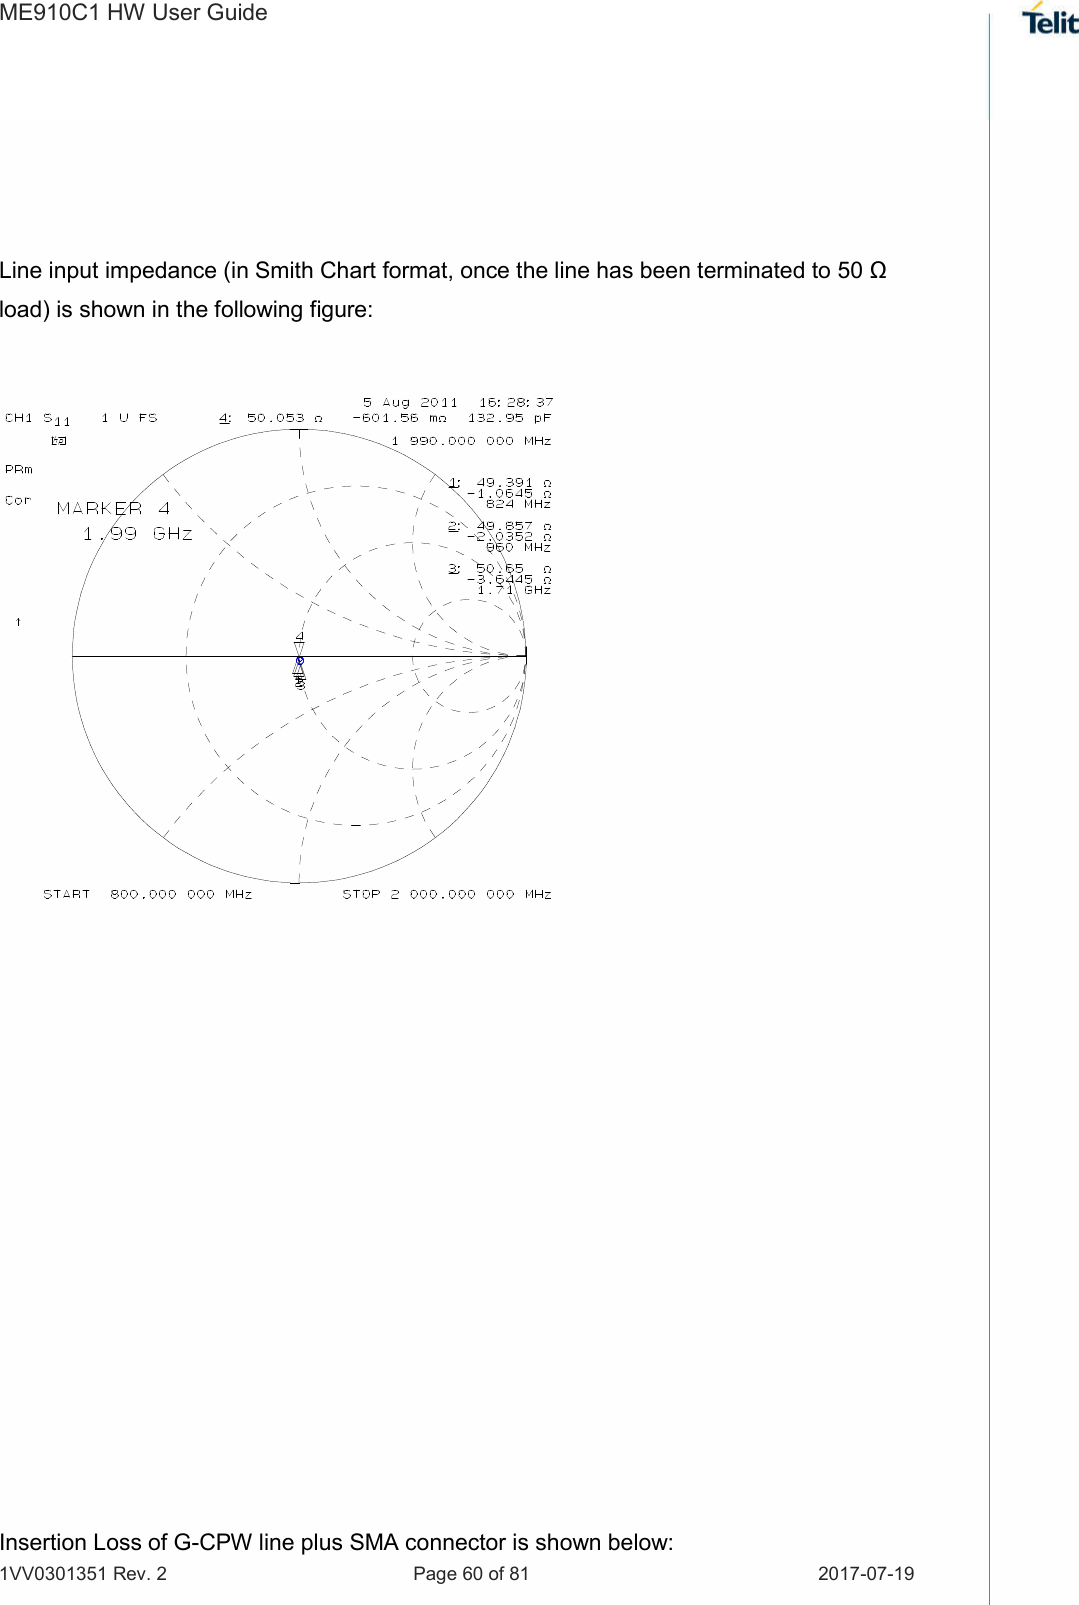 ME910C1 HW User Guide 1VV0301351 Rev. 2  Page 60 of 81  2017-07-19    Line input impedance (in Smith Chart format, once the line has been terminated to 50 Ω load) is shown in the following figure:                Insertion Loss of G-CPW line plus SMA connector is shown below: 